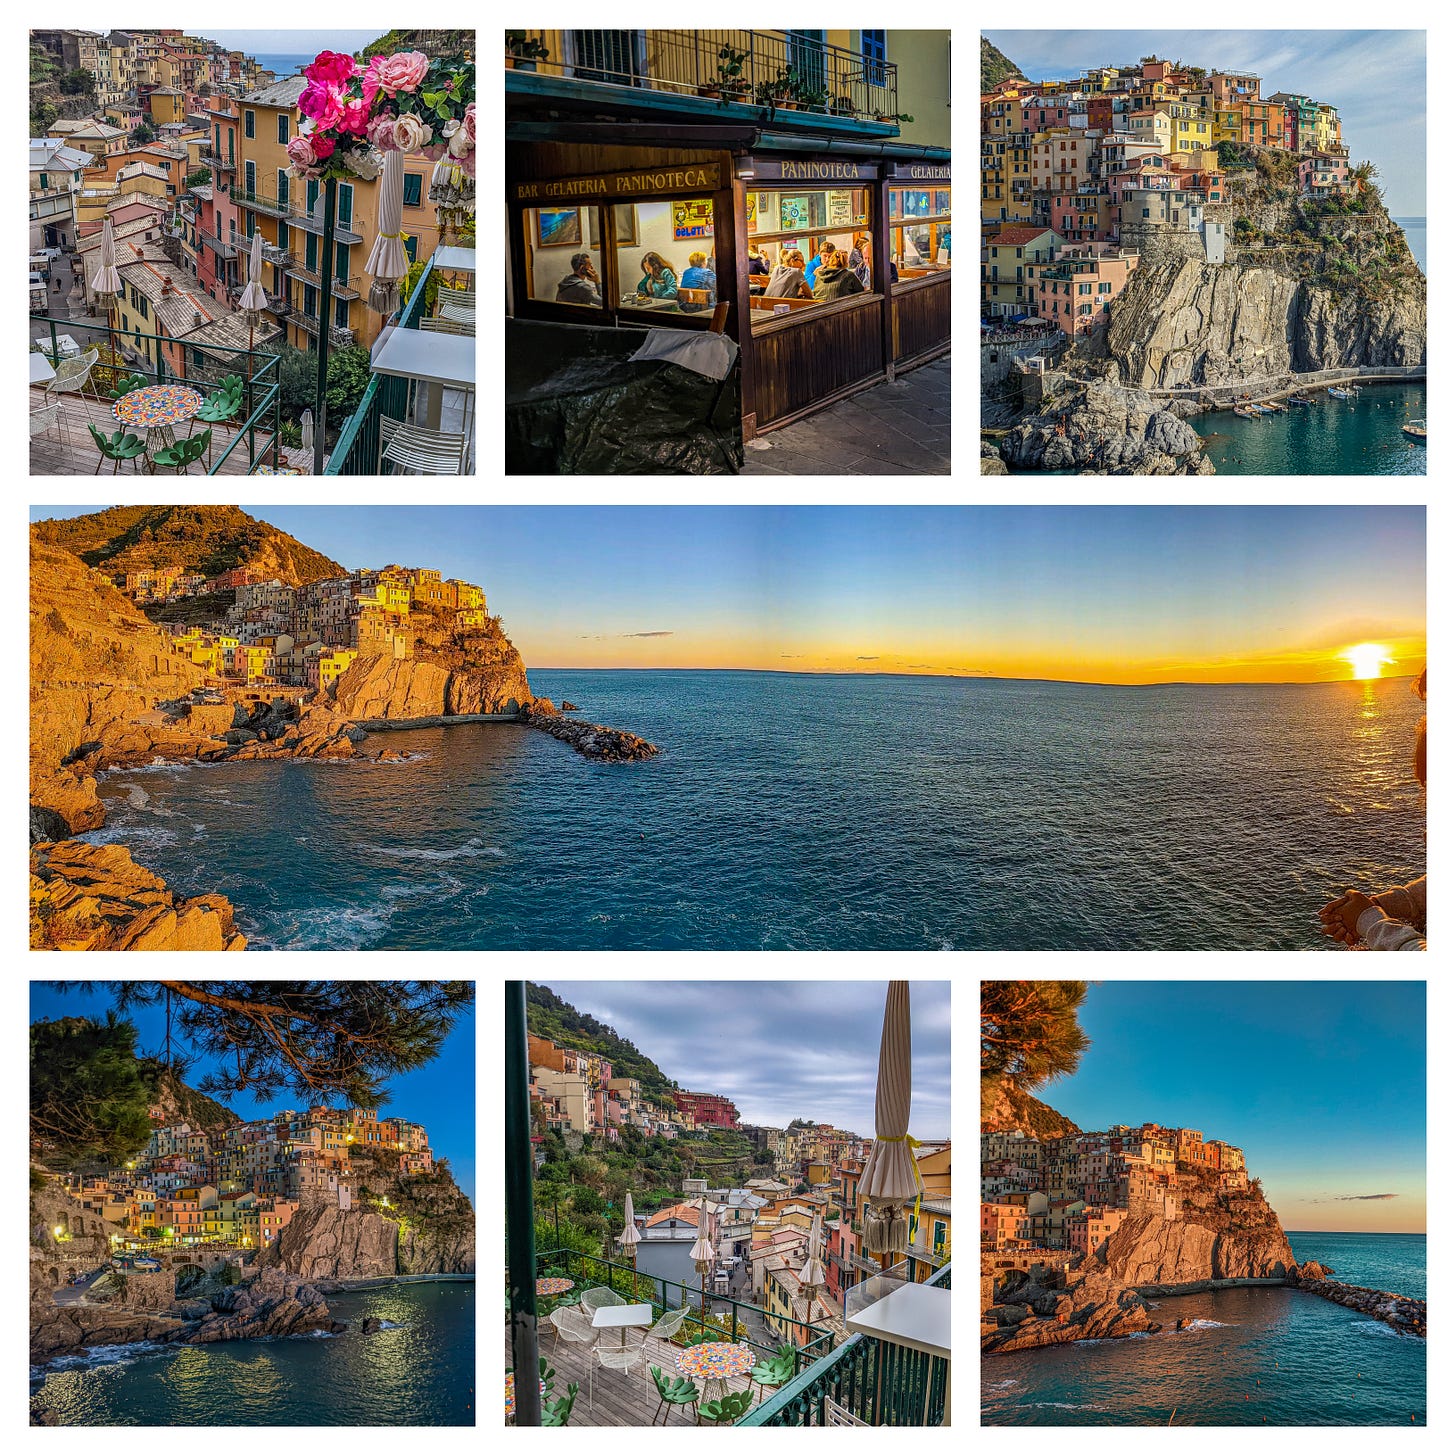 A collection of photos of Manarola at sunset. Most show the light on the village and the ocean but one shows a group of people in a cafe. 